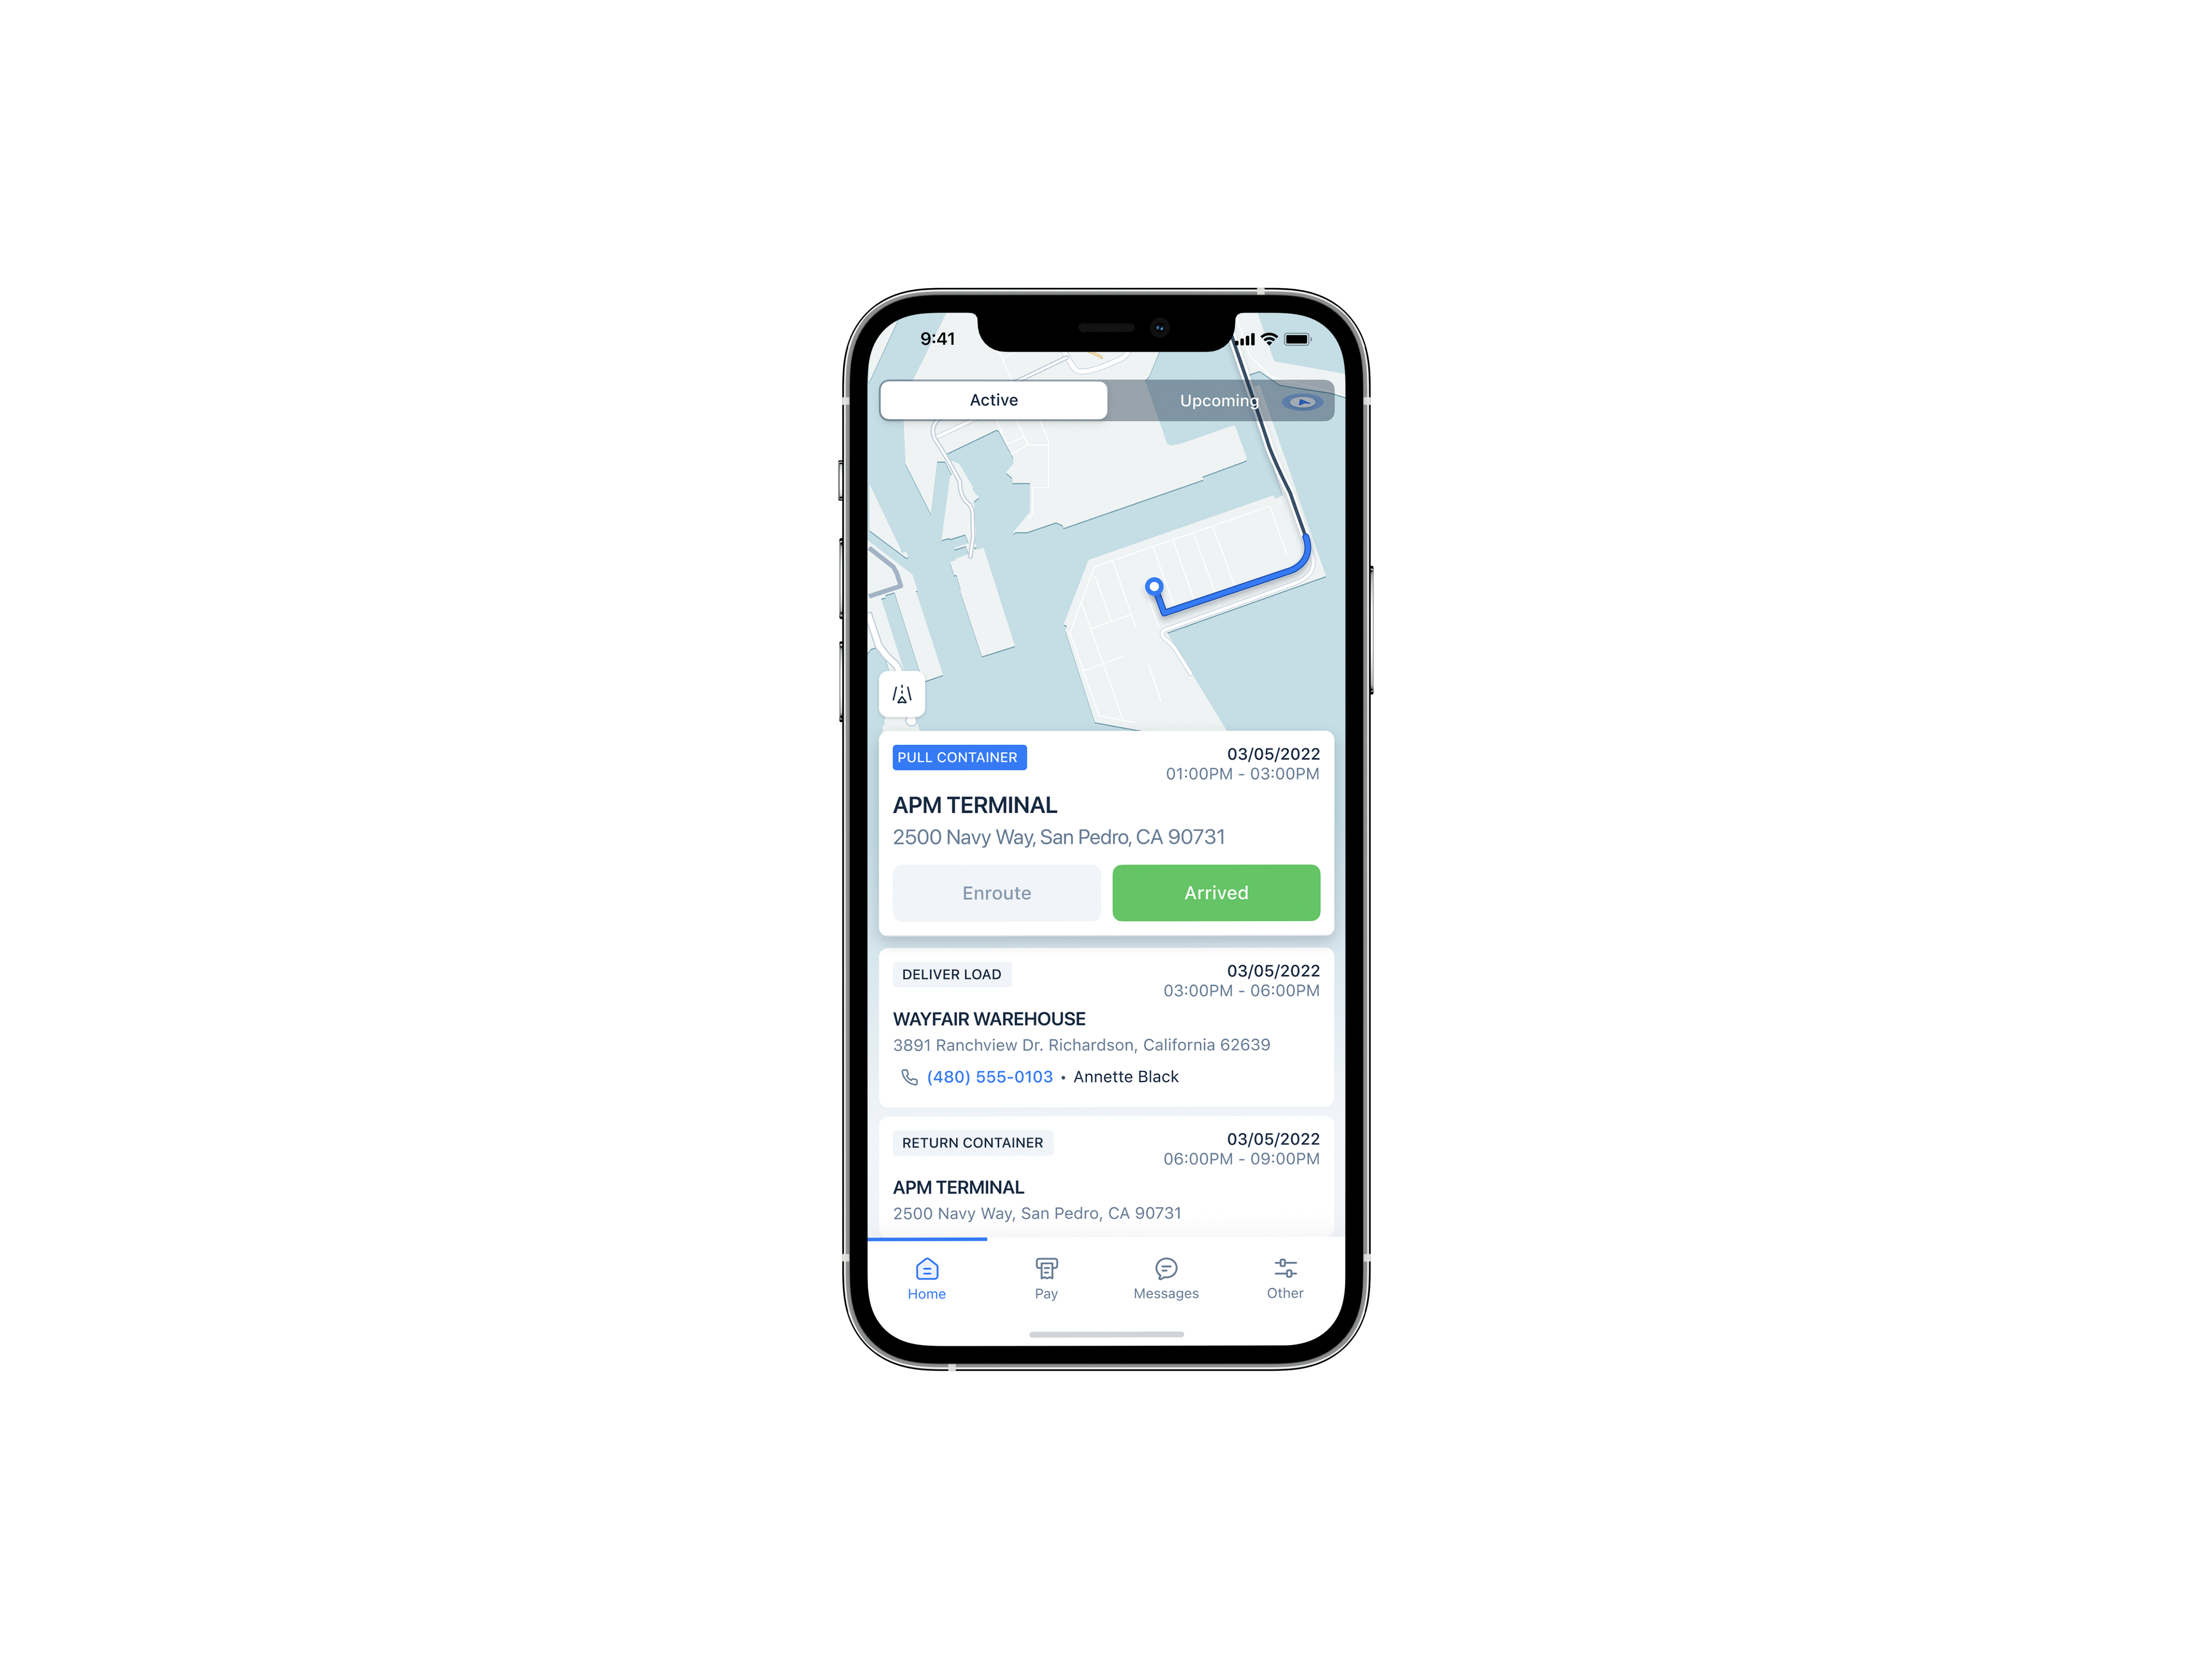 iOS and Android compatible driver app to receive dispatch, communicate with dispatchers, upload documentation, clock in/out, upload safety documents (ie. registration), view driver settlements (permission-based), and more!